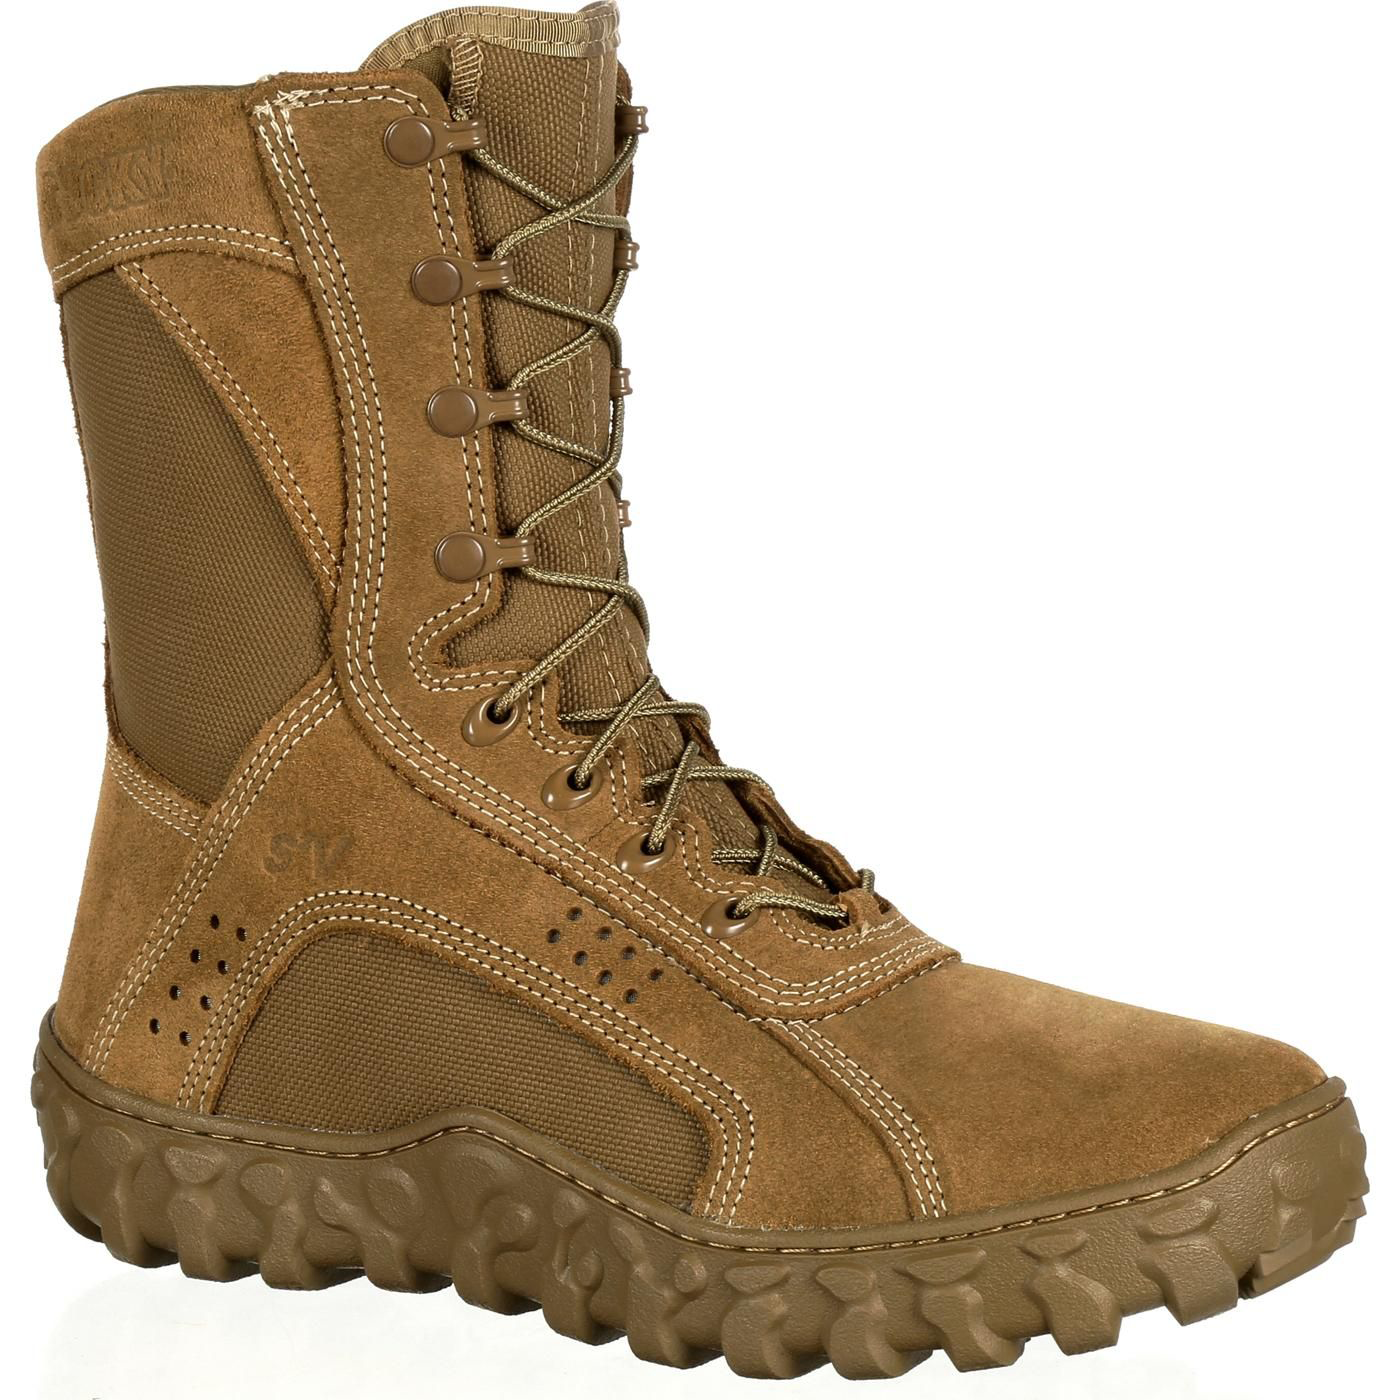 Rocky S2V Tactical Military Boots for Men - Coyote Brown - 8.5W